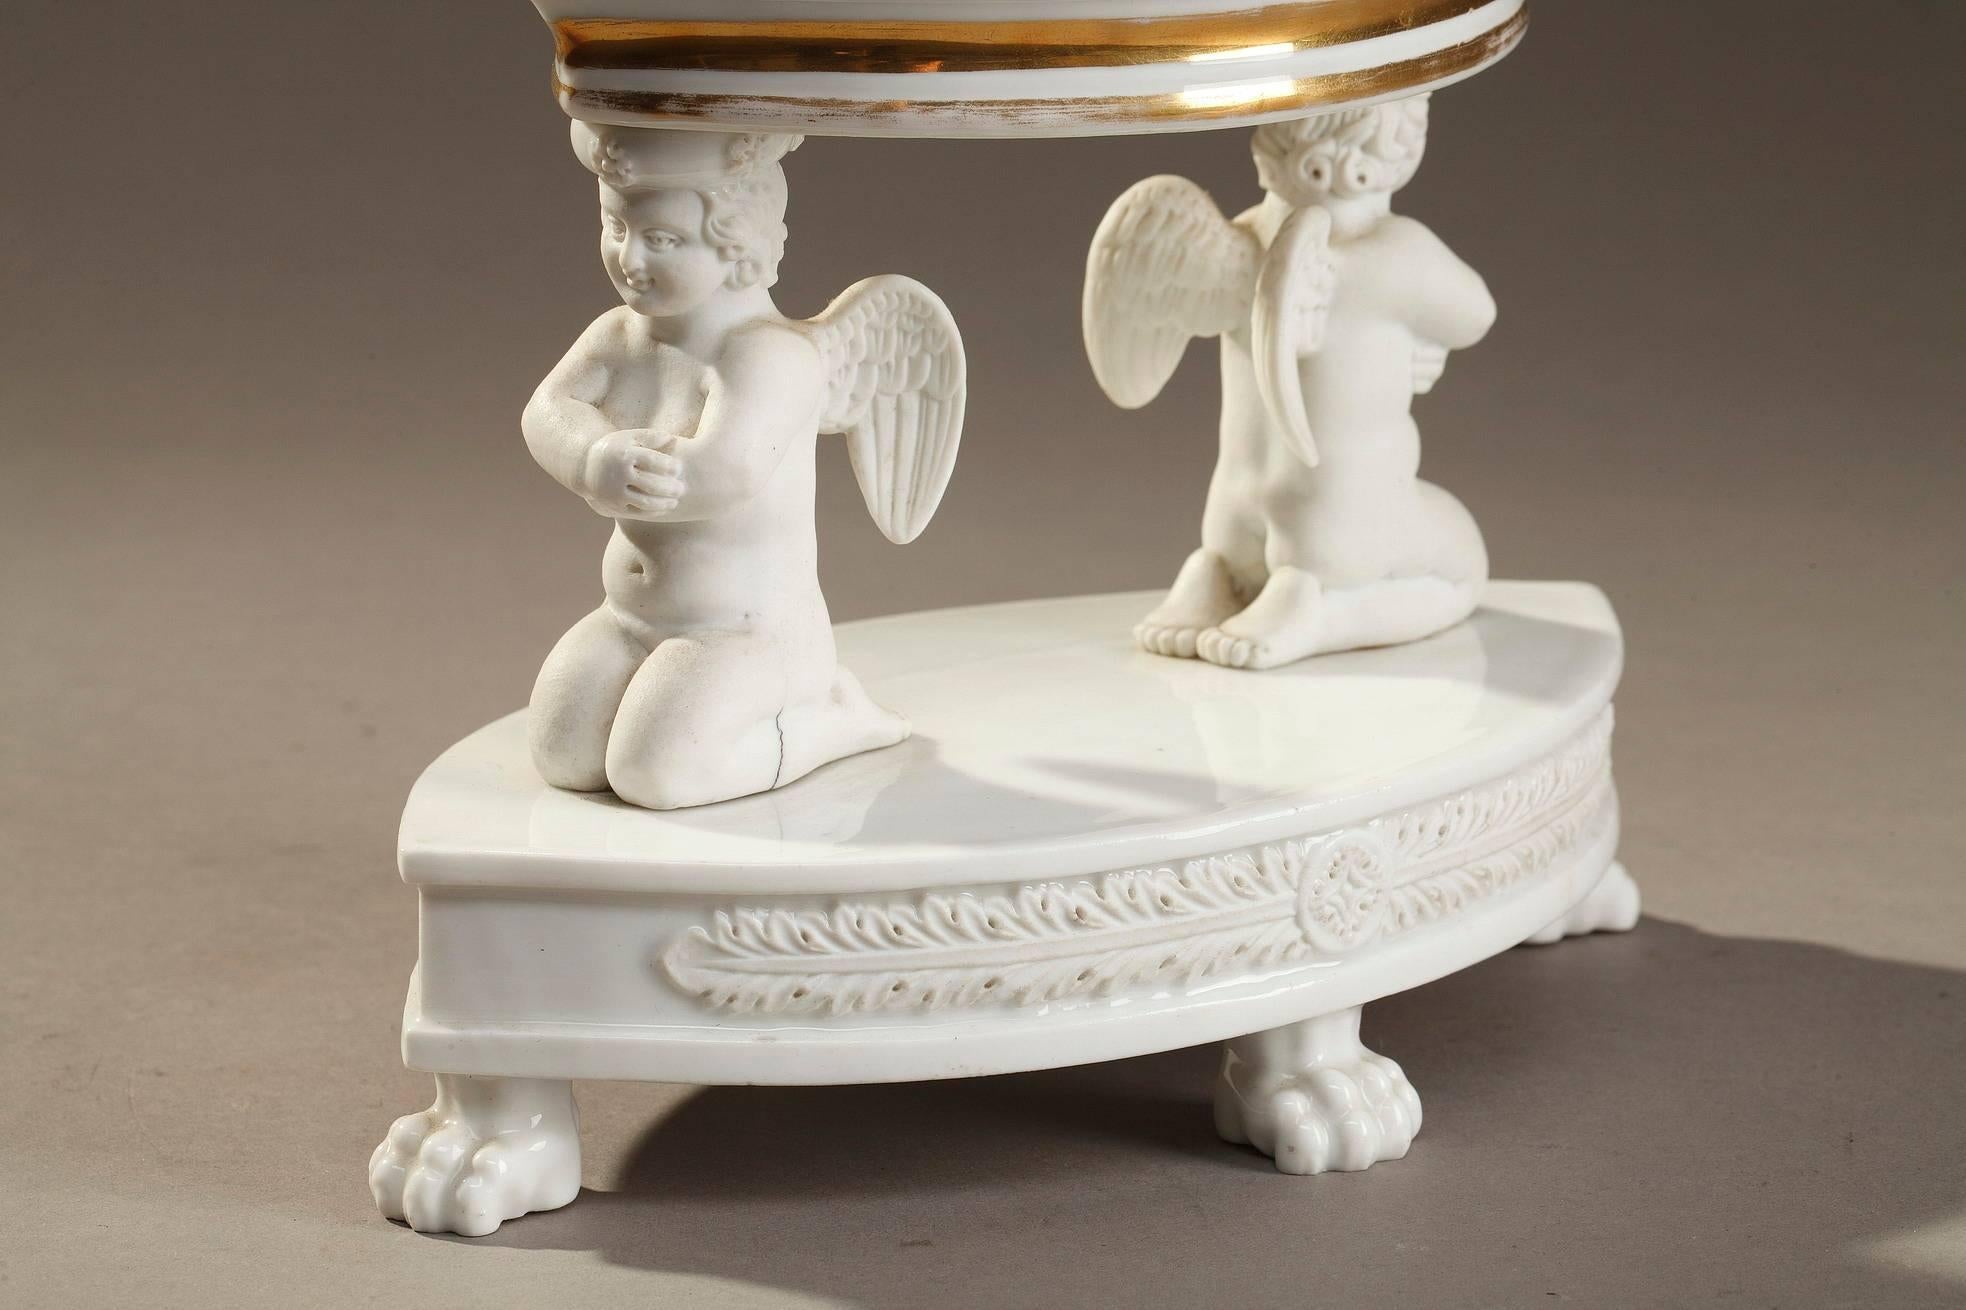 Early 19th Century Empire Bisque and Porcelain Table Centerpiece 3